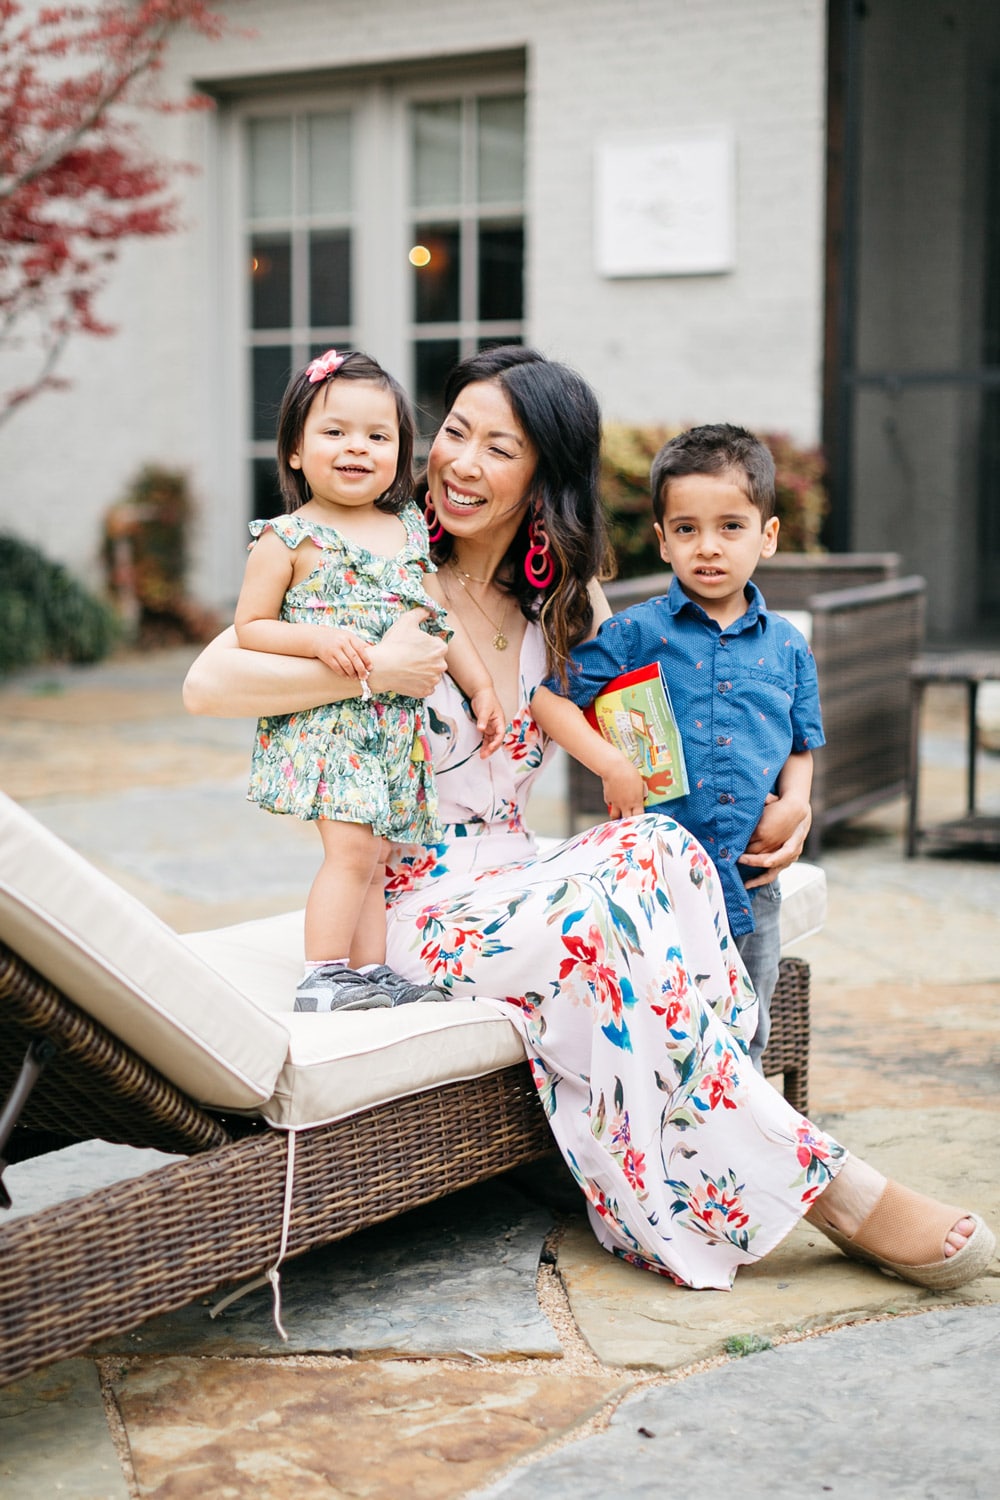 style of sam with son and daughter in floral dress all things mochi earrings